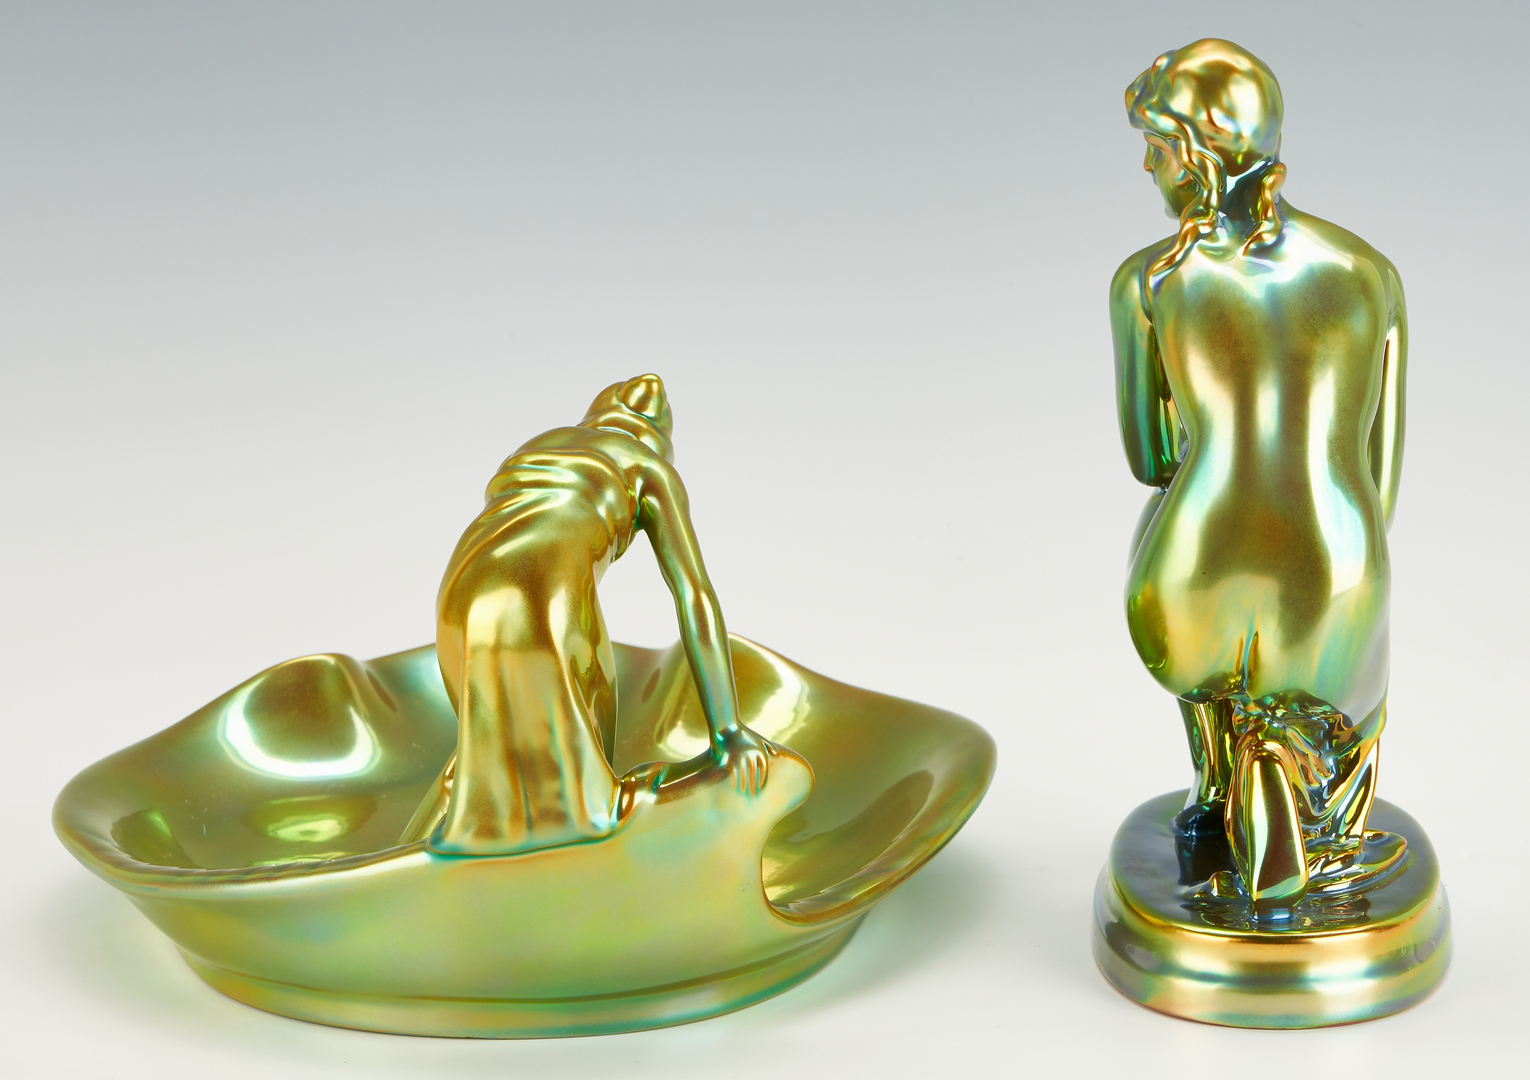 Lot 953: Two (2) Zsolnay Iridescent Green Eosin Figural Ceramic Items